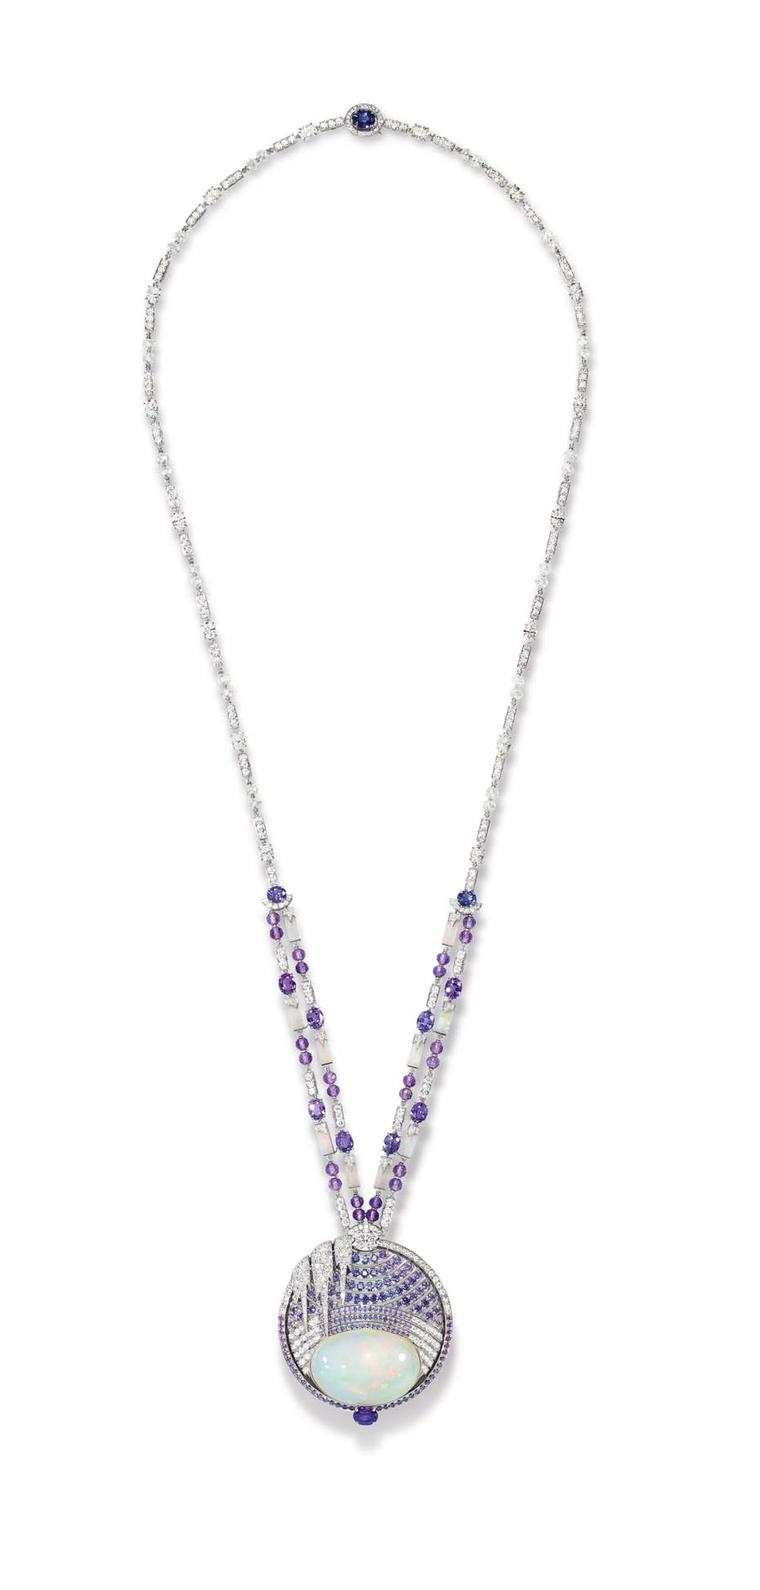 Chaumet Lumieres d’Eau high jewellery necklace in white gold, created for the Biennale des Antiquaires in Paris, set with a 59.58 ct cabochon-cut white opal from Ethiopia, round and oval-cut violet sapphires from Ceylon and Madagascar, oval-cut and brilli